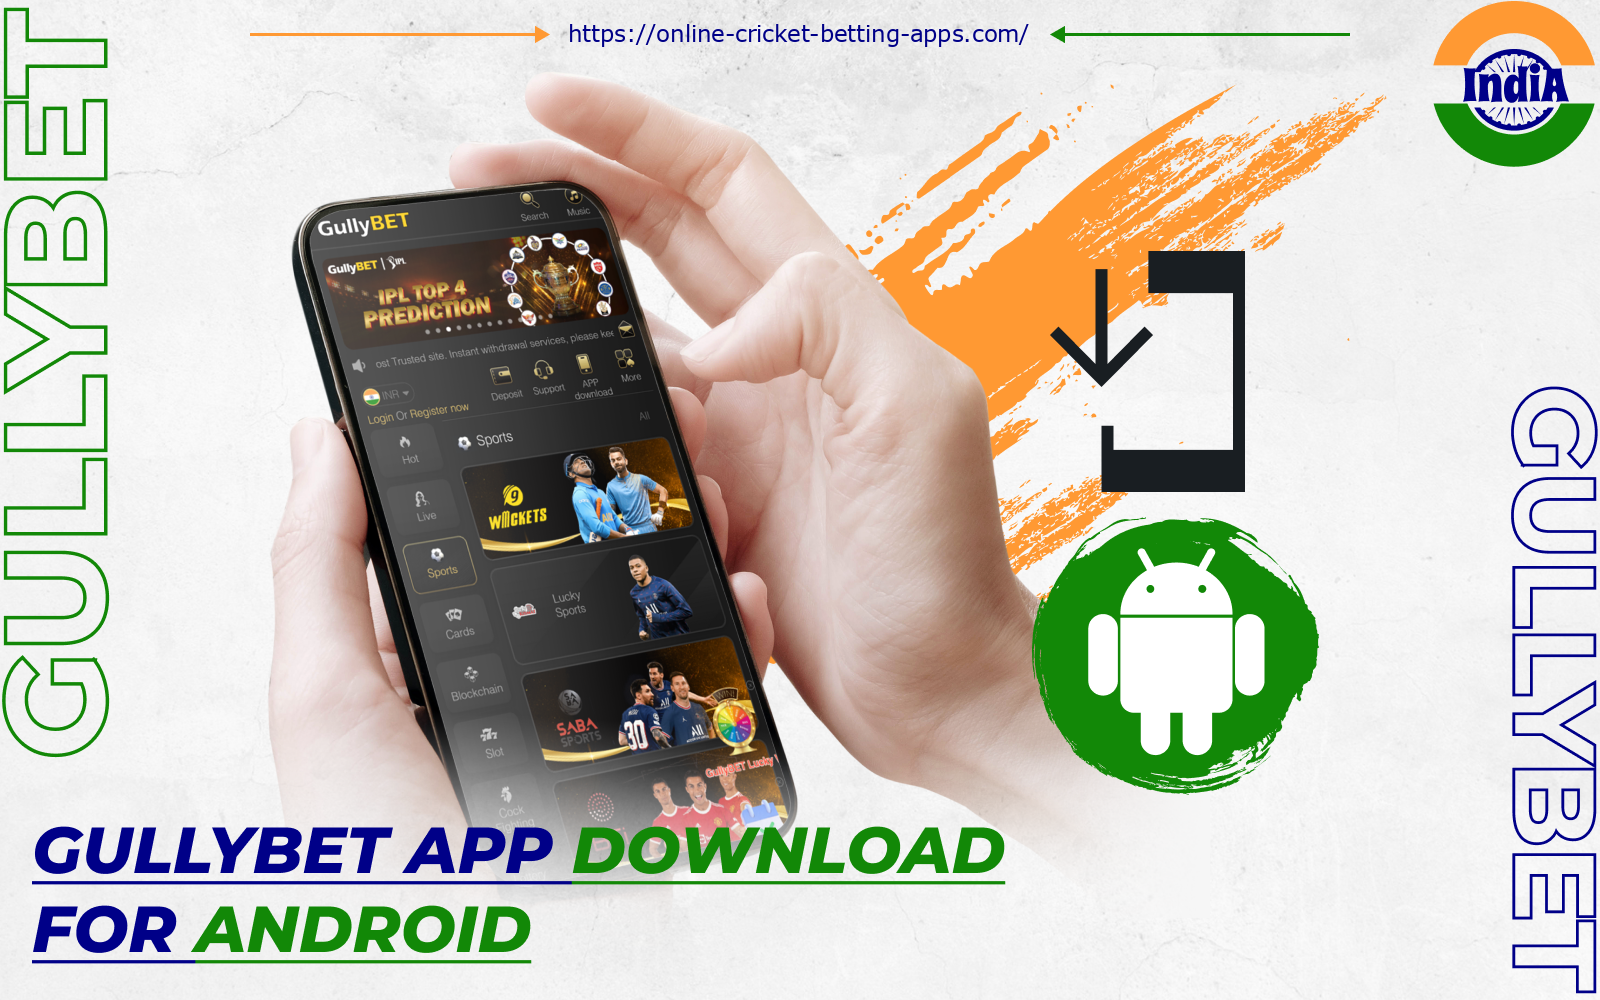 Download the Gullybet app on Android only from the bookmaker's official website and start betting at any time